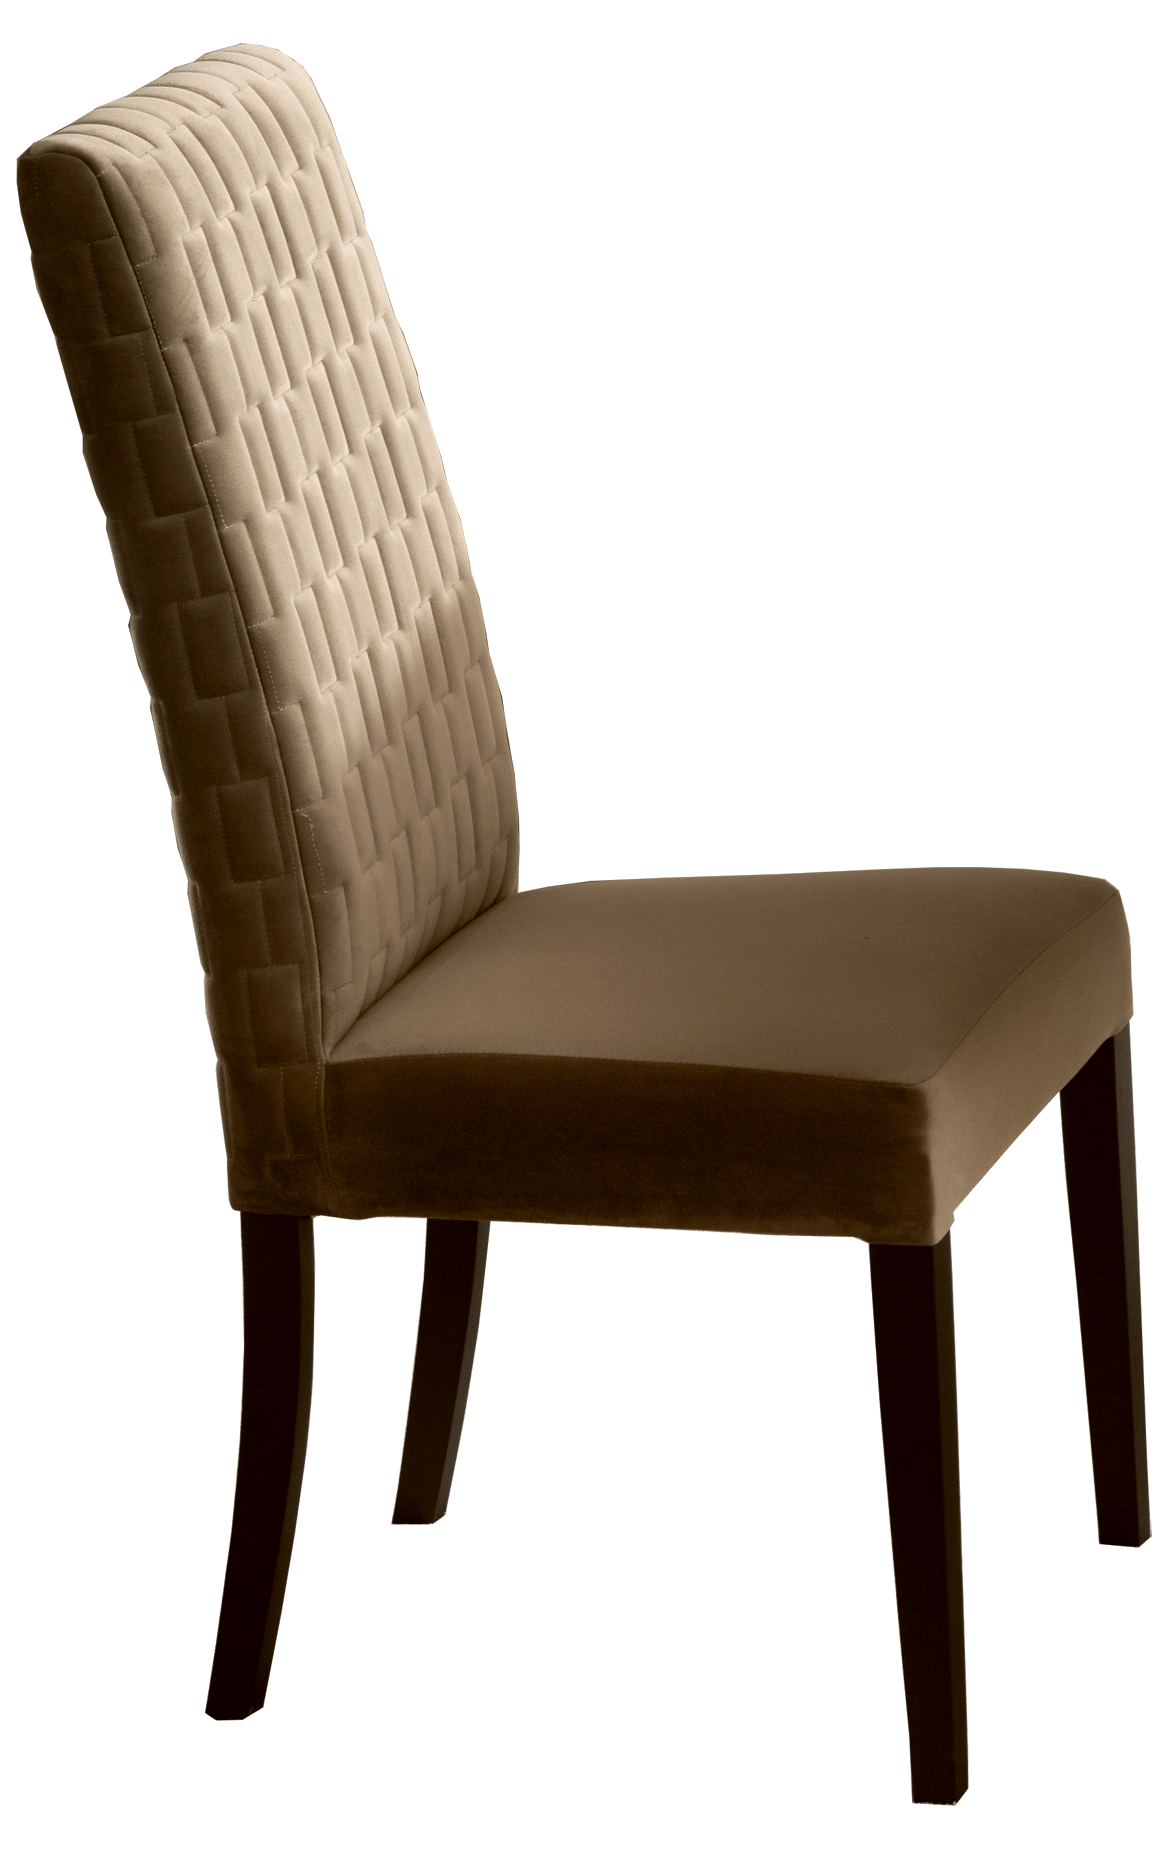 Dining Room Furniture Classic Dining Room Sets Poesia Dining Chair by Arredoclassic